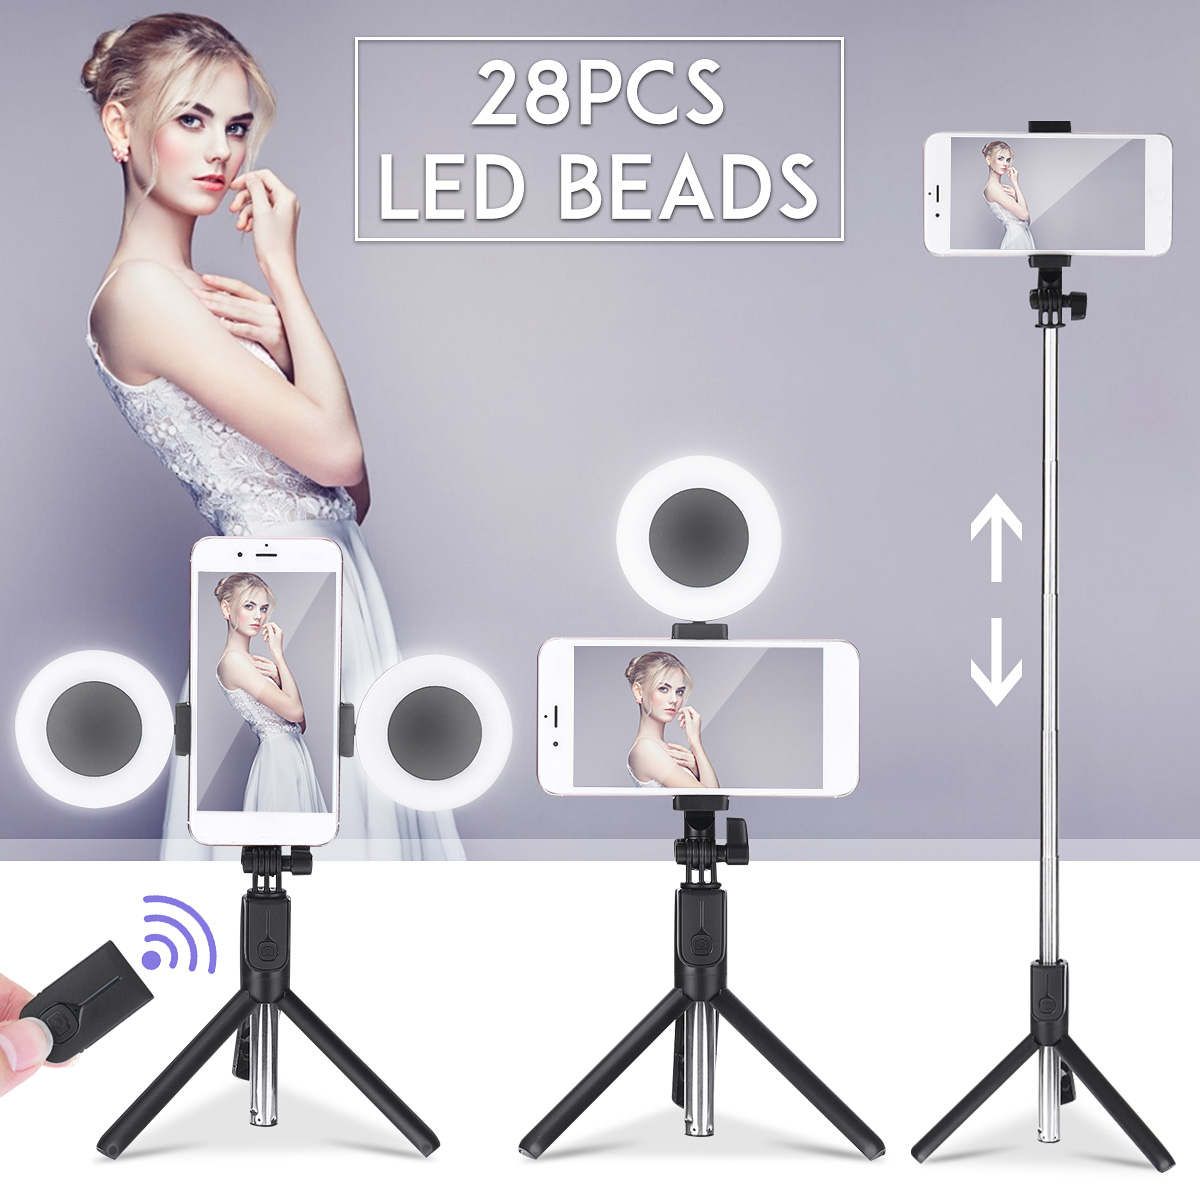 Telescopic-Fill-Light-Multifunctional-bluetooth-Selfie-Stick-Tripod-Outdoor-Mobile-Phone-Photography-1760893-1